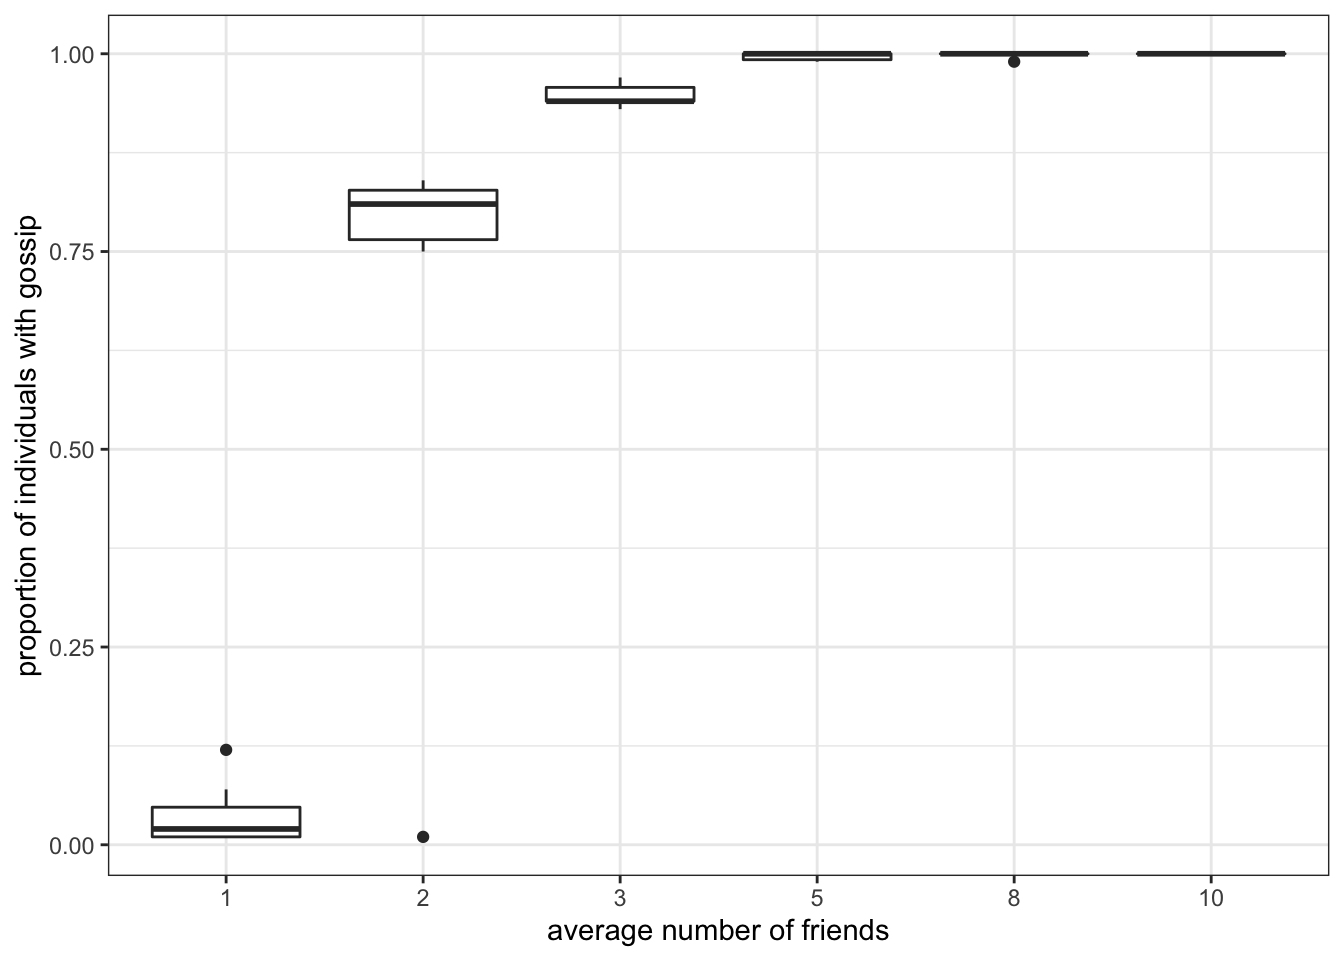 Here we plot the end points of each simulation from the previous plot as a boxplot. This, again, shows that there is a dramatic difference of diffusion in networks with 1 to 3 friends, but far less in those with 5 and more friends.